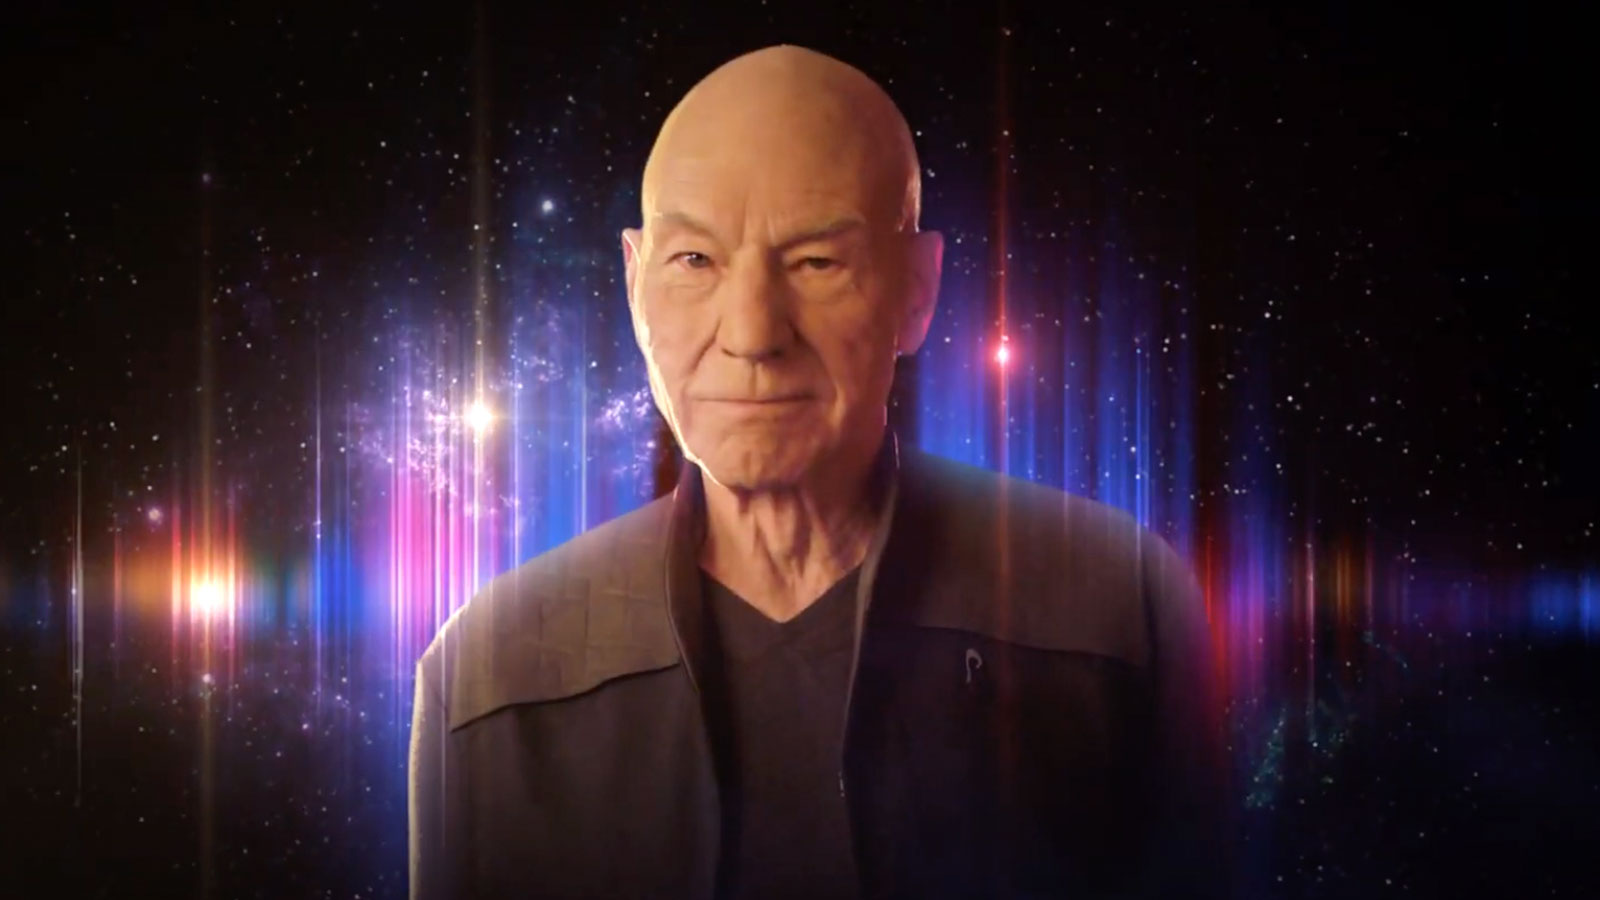 Star Trek Universe Super Bowl Commercial Features Stars Of Discovery, Picard & Strange New Worlds